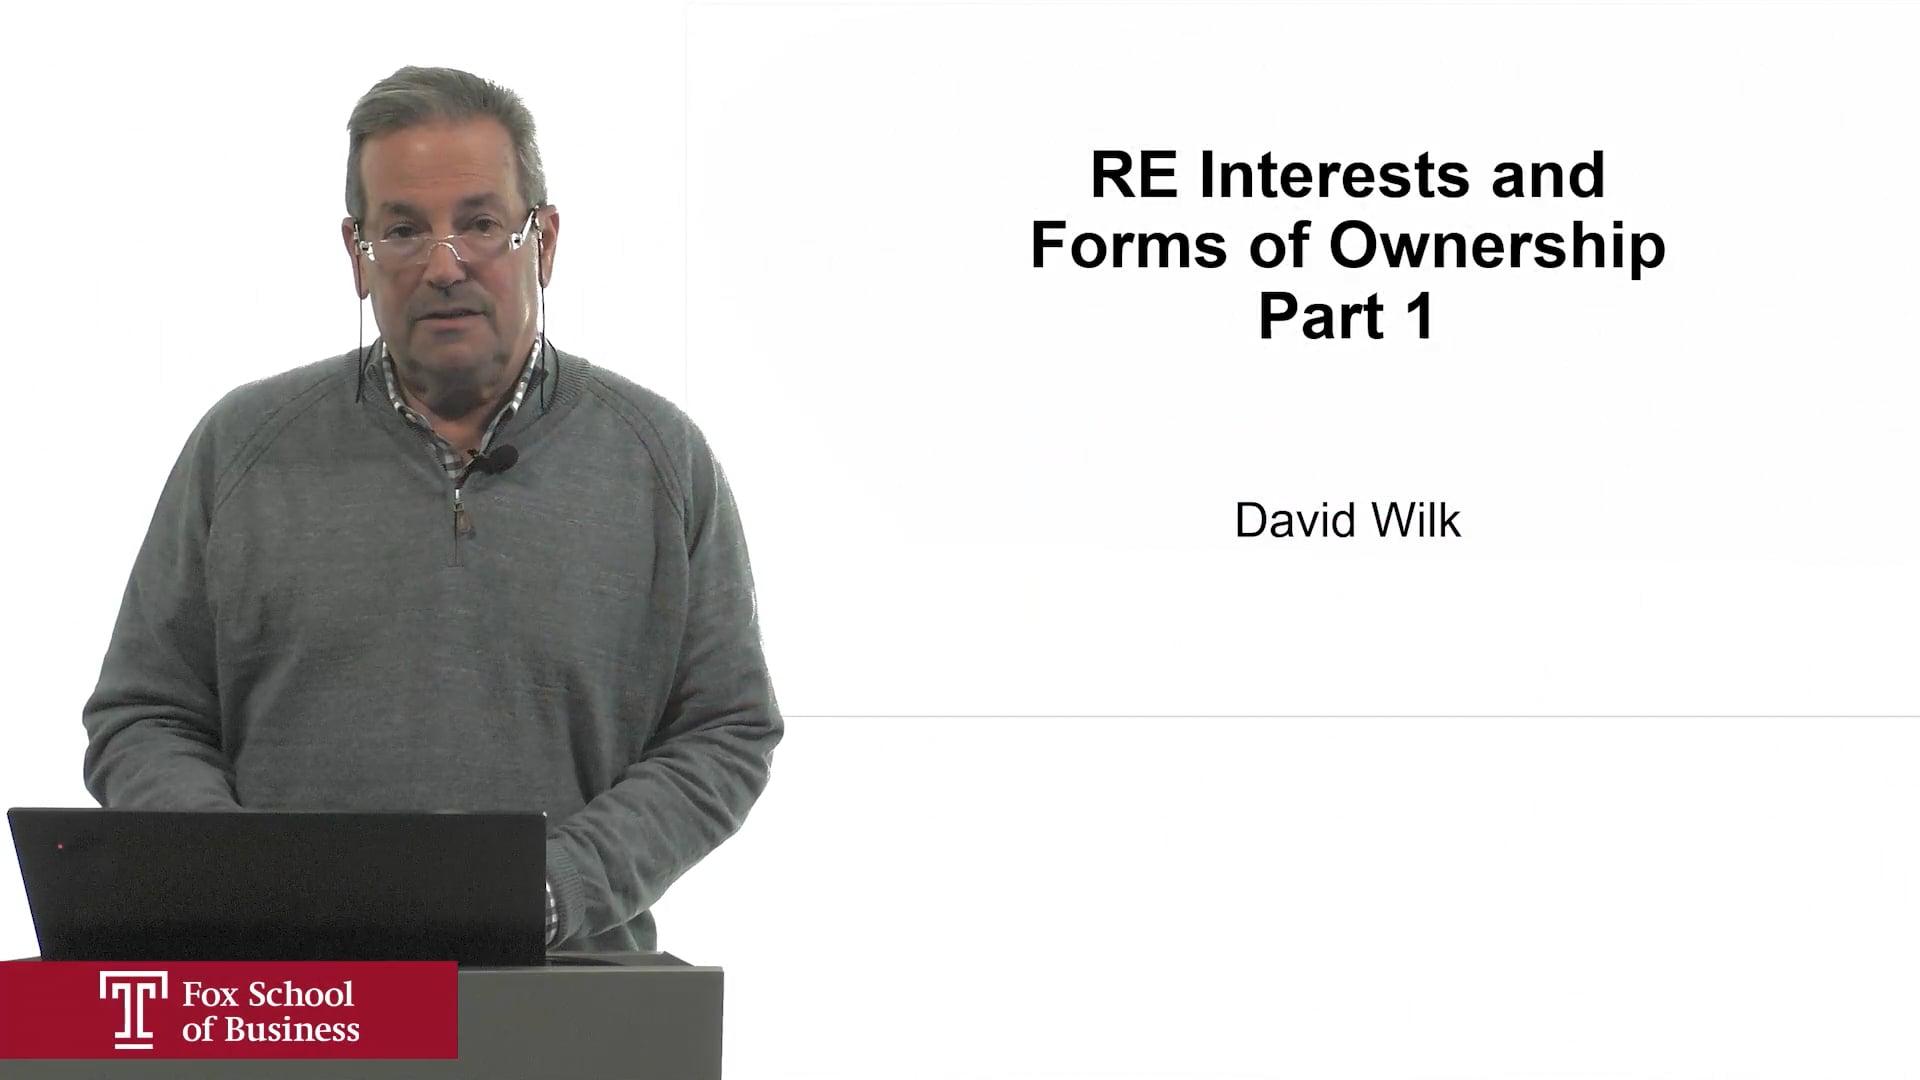 Real Estate Interests and Forms of Ownership Part 1